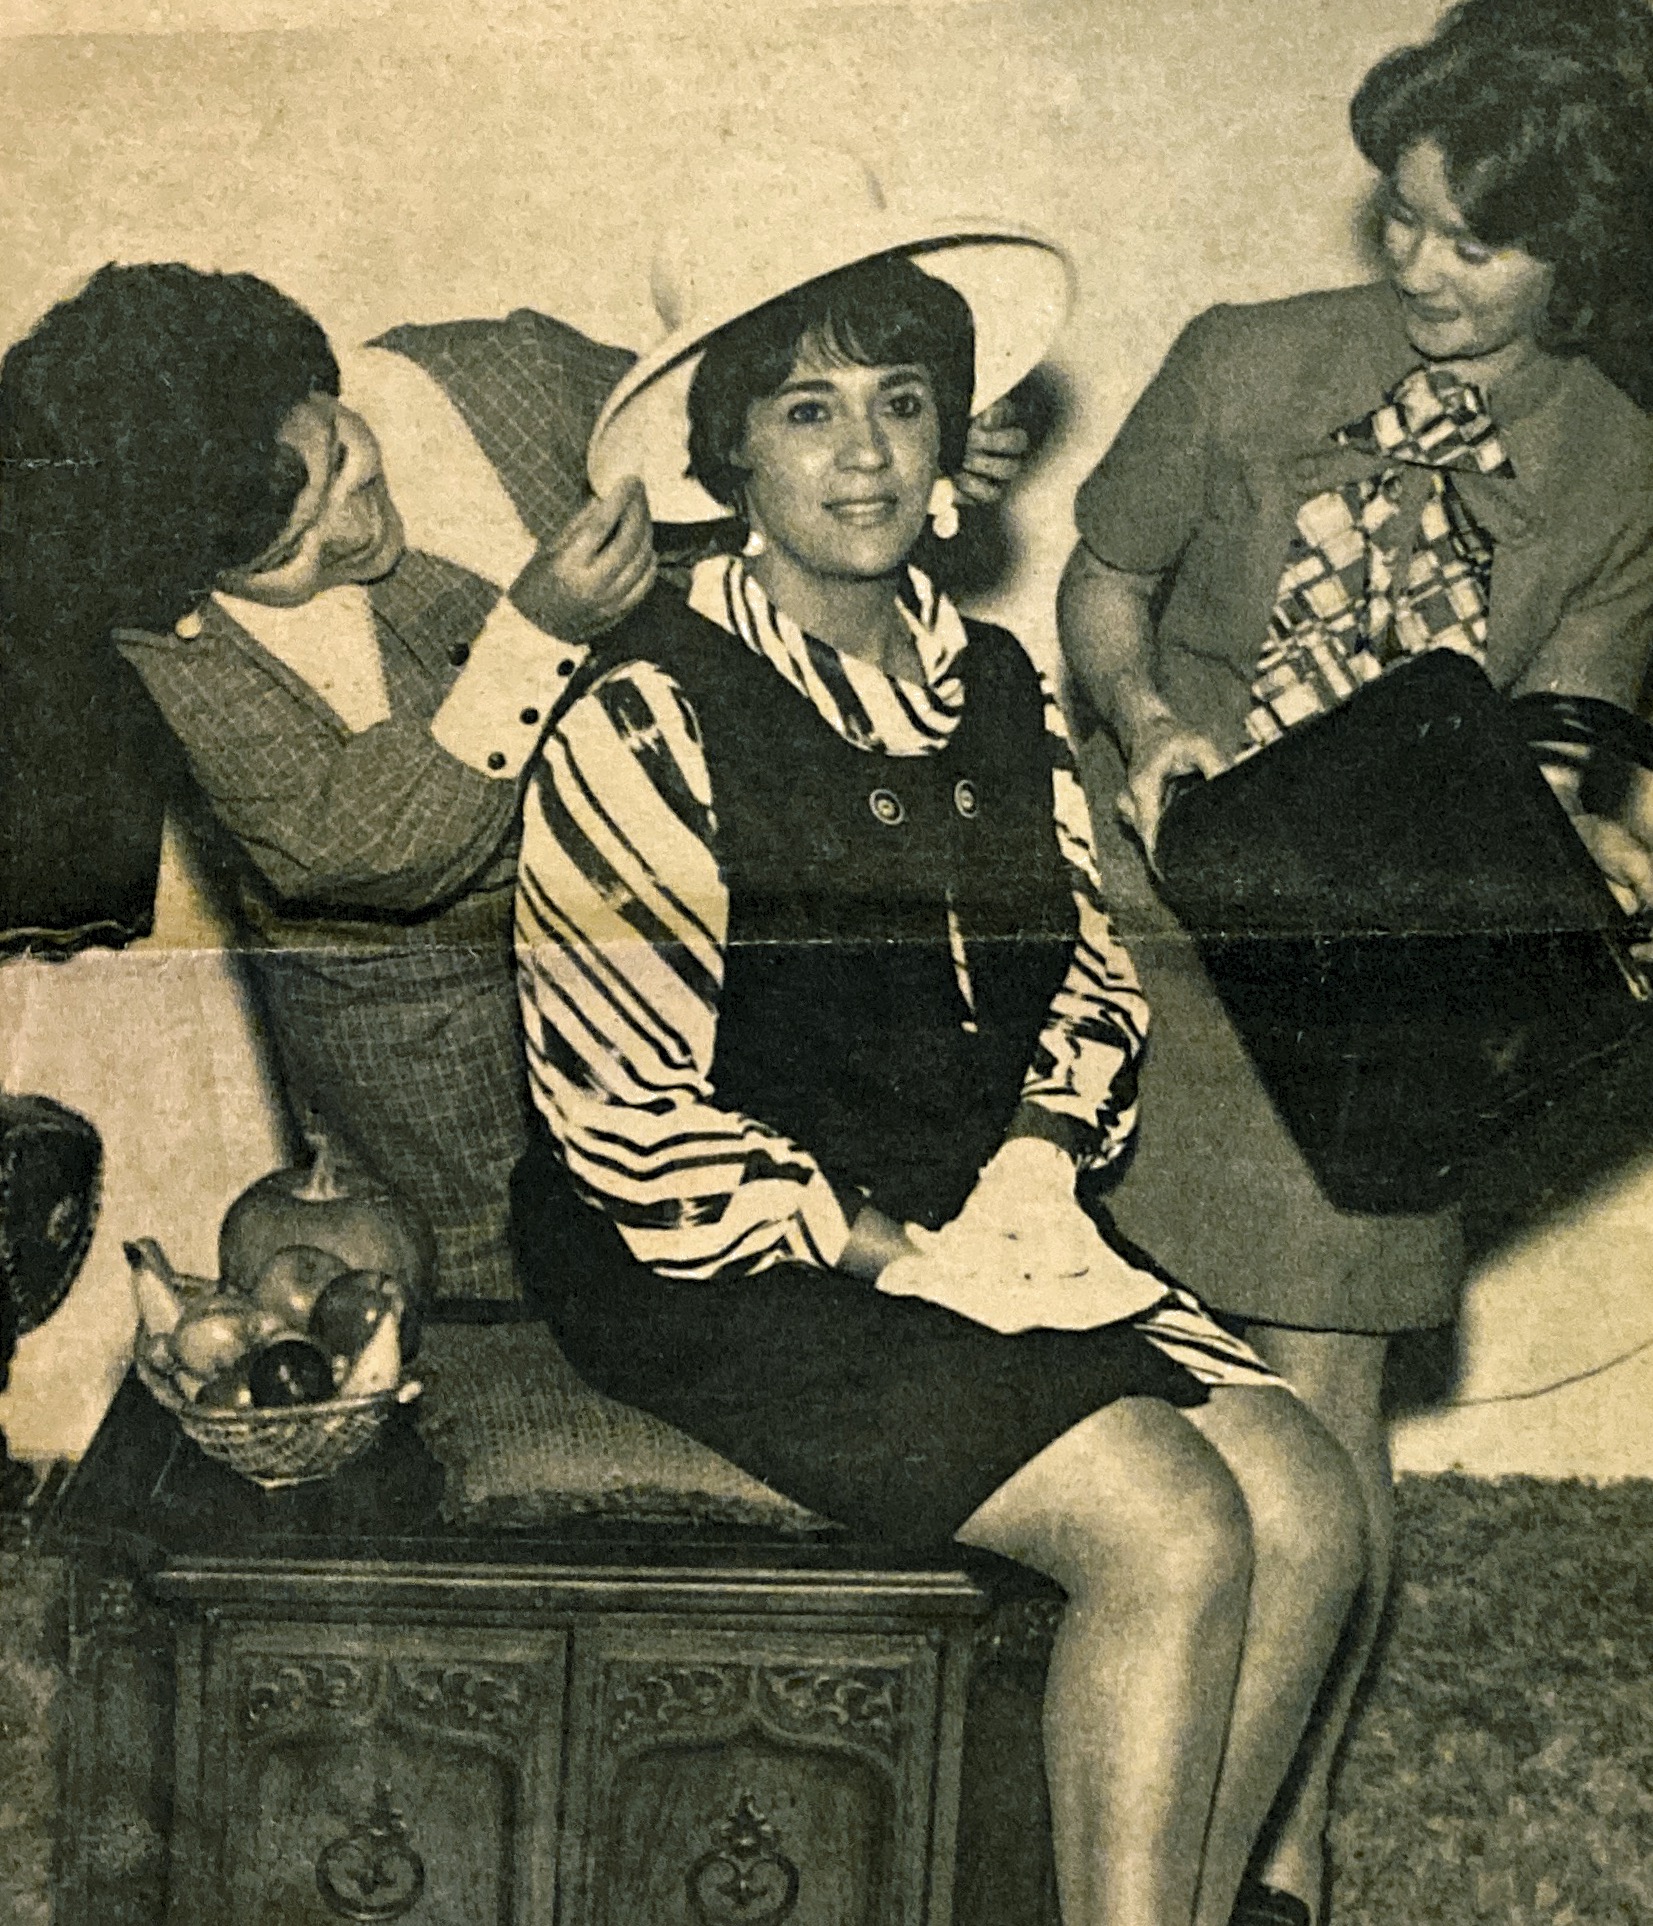 My mother was a member of the local
Women club back in the 60’s. She participated in a fashion show to raise money for a local charity. 
Here she is dressed beautifully in her zebra print fashion. Mama passed January 18, 2020. I have wonderful memories to cherish of the beautiful woman that she was inside and out. 